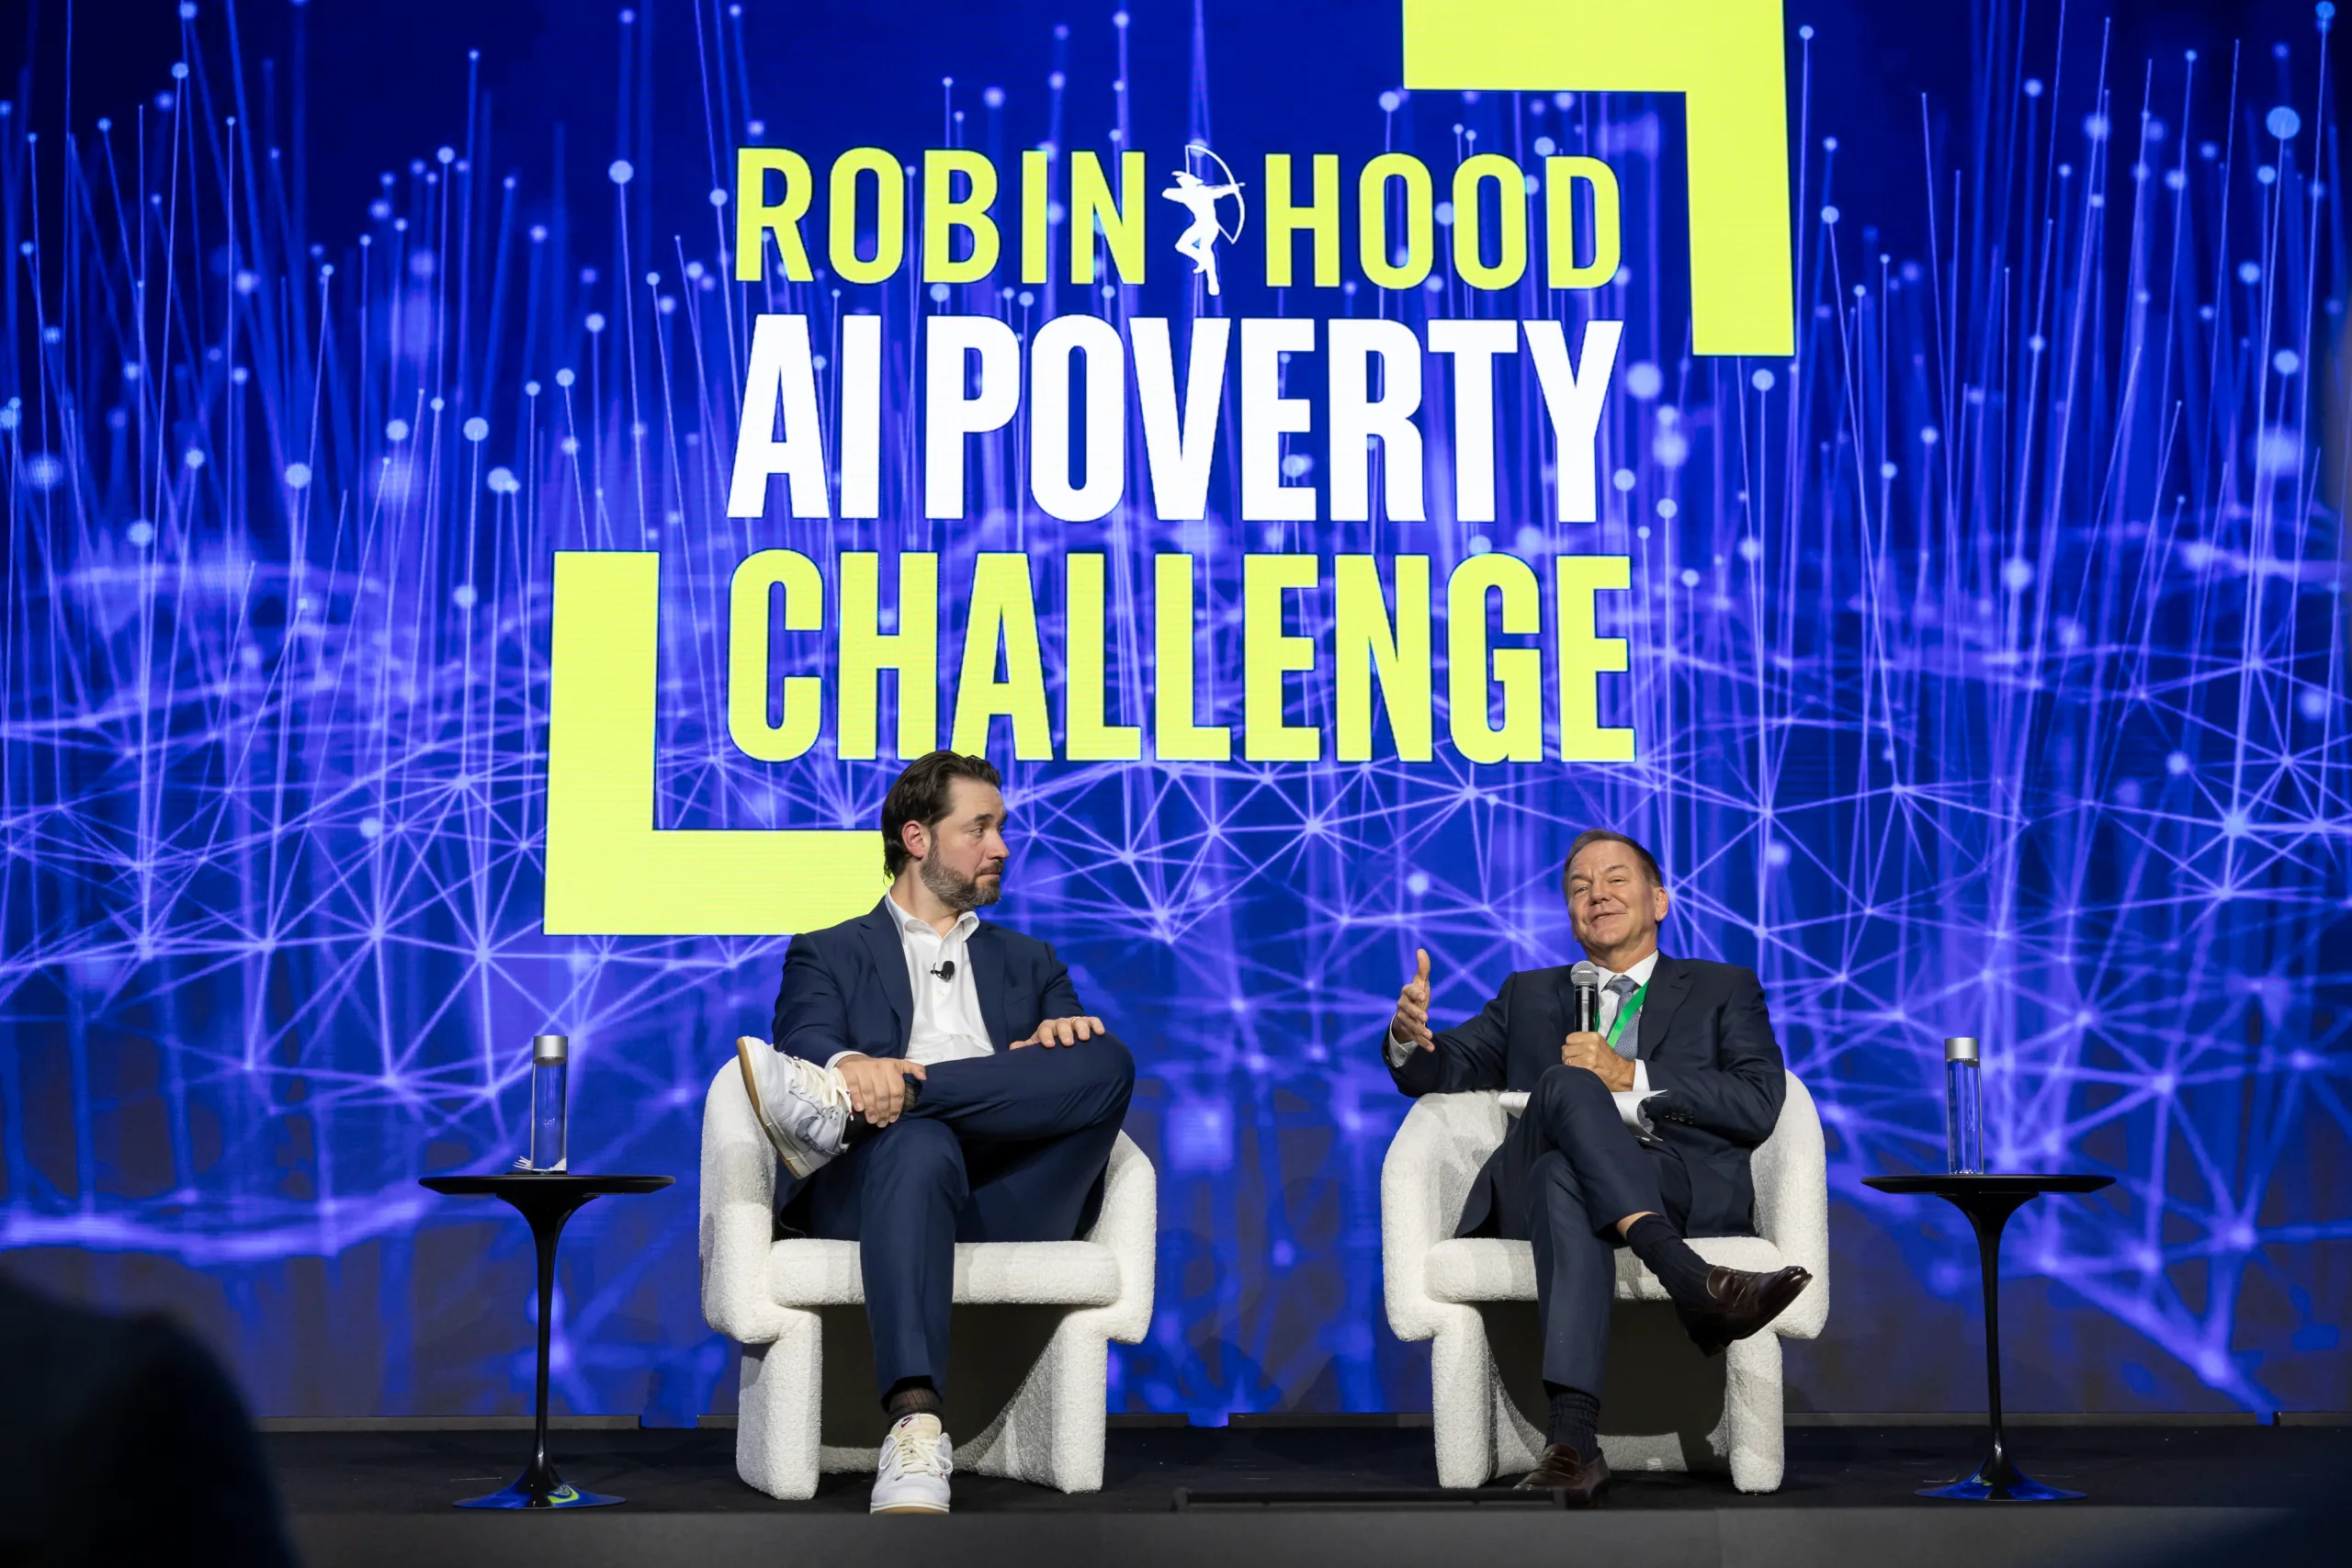 Alexis Ohanian and Pau Tudor Jones announce the Robin Hood AI Poverty Challenge on stage at a conference.